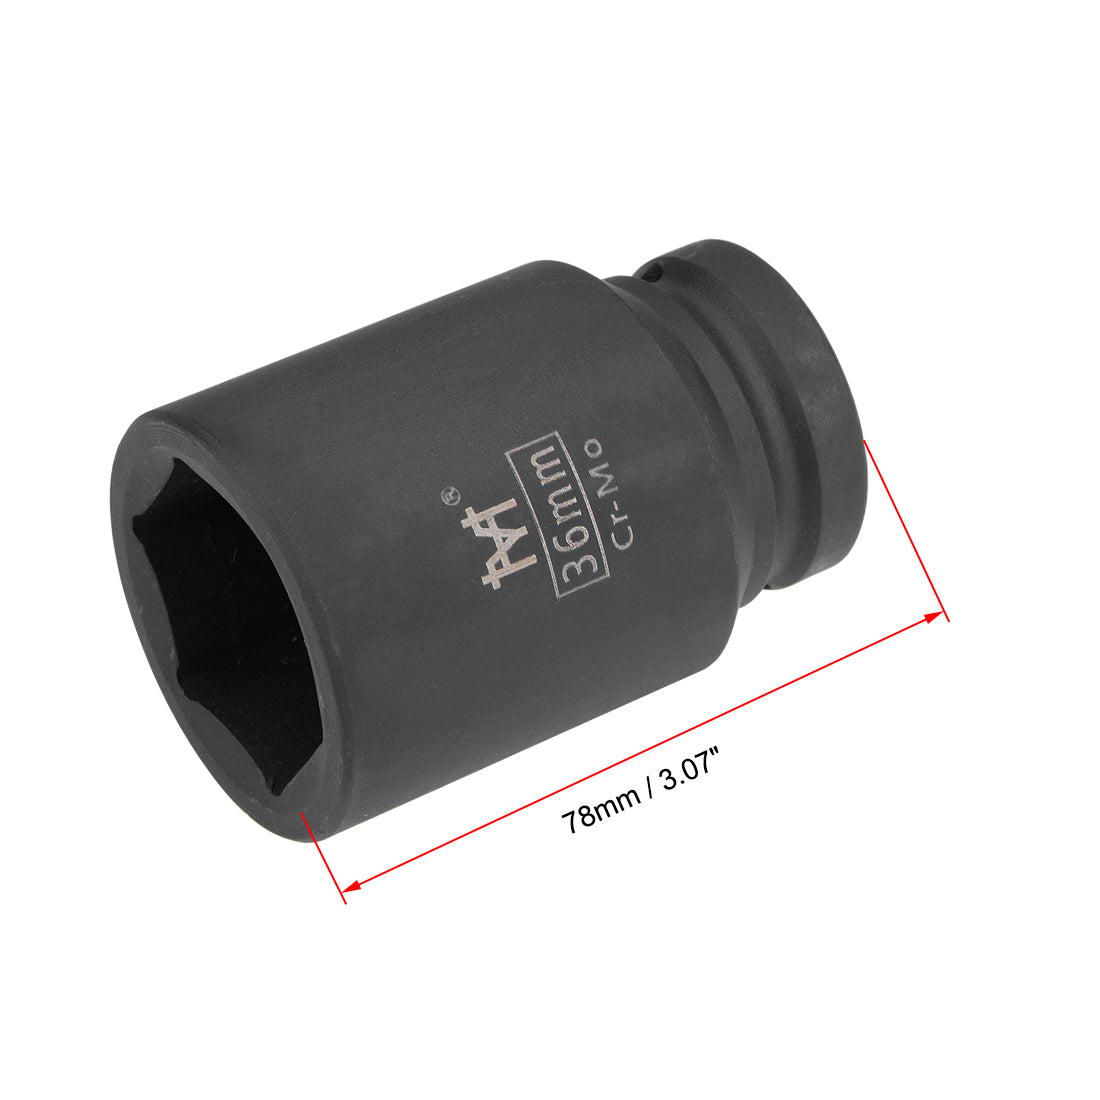 uxcell Uxcell Drive by Deep Impact Socket, 6-Point, Cr-Mo Alloy Steel, Metric